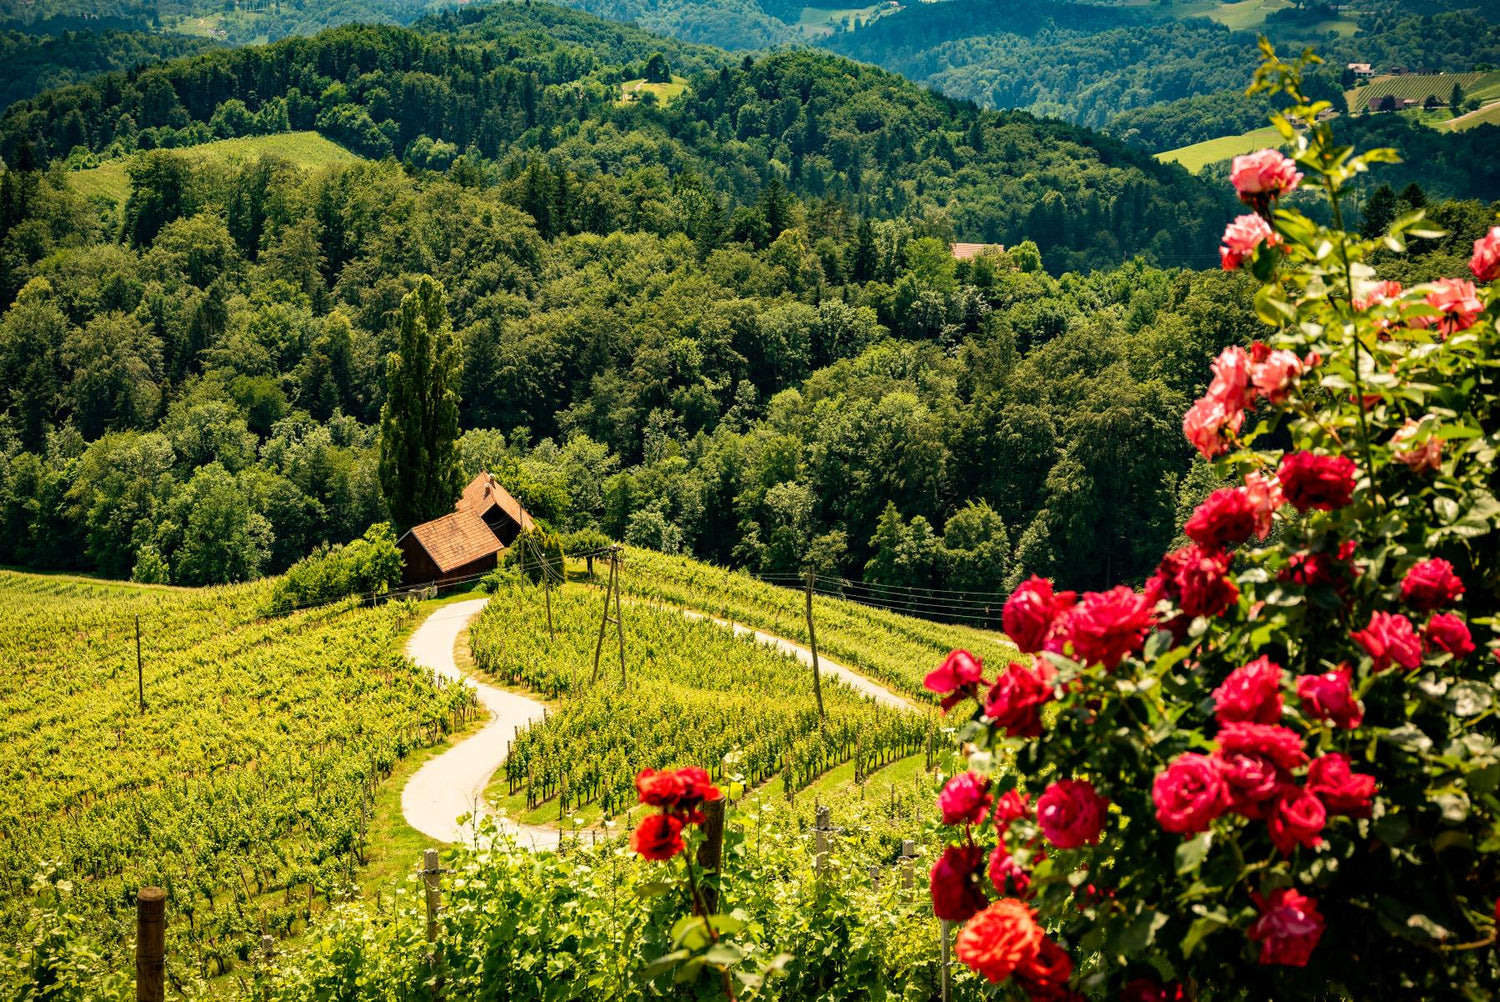 A lush scenery with forests, green fields, flowers and a winding road